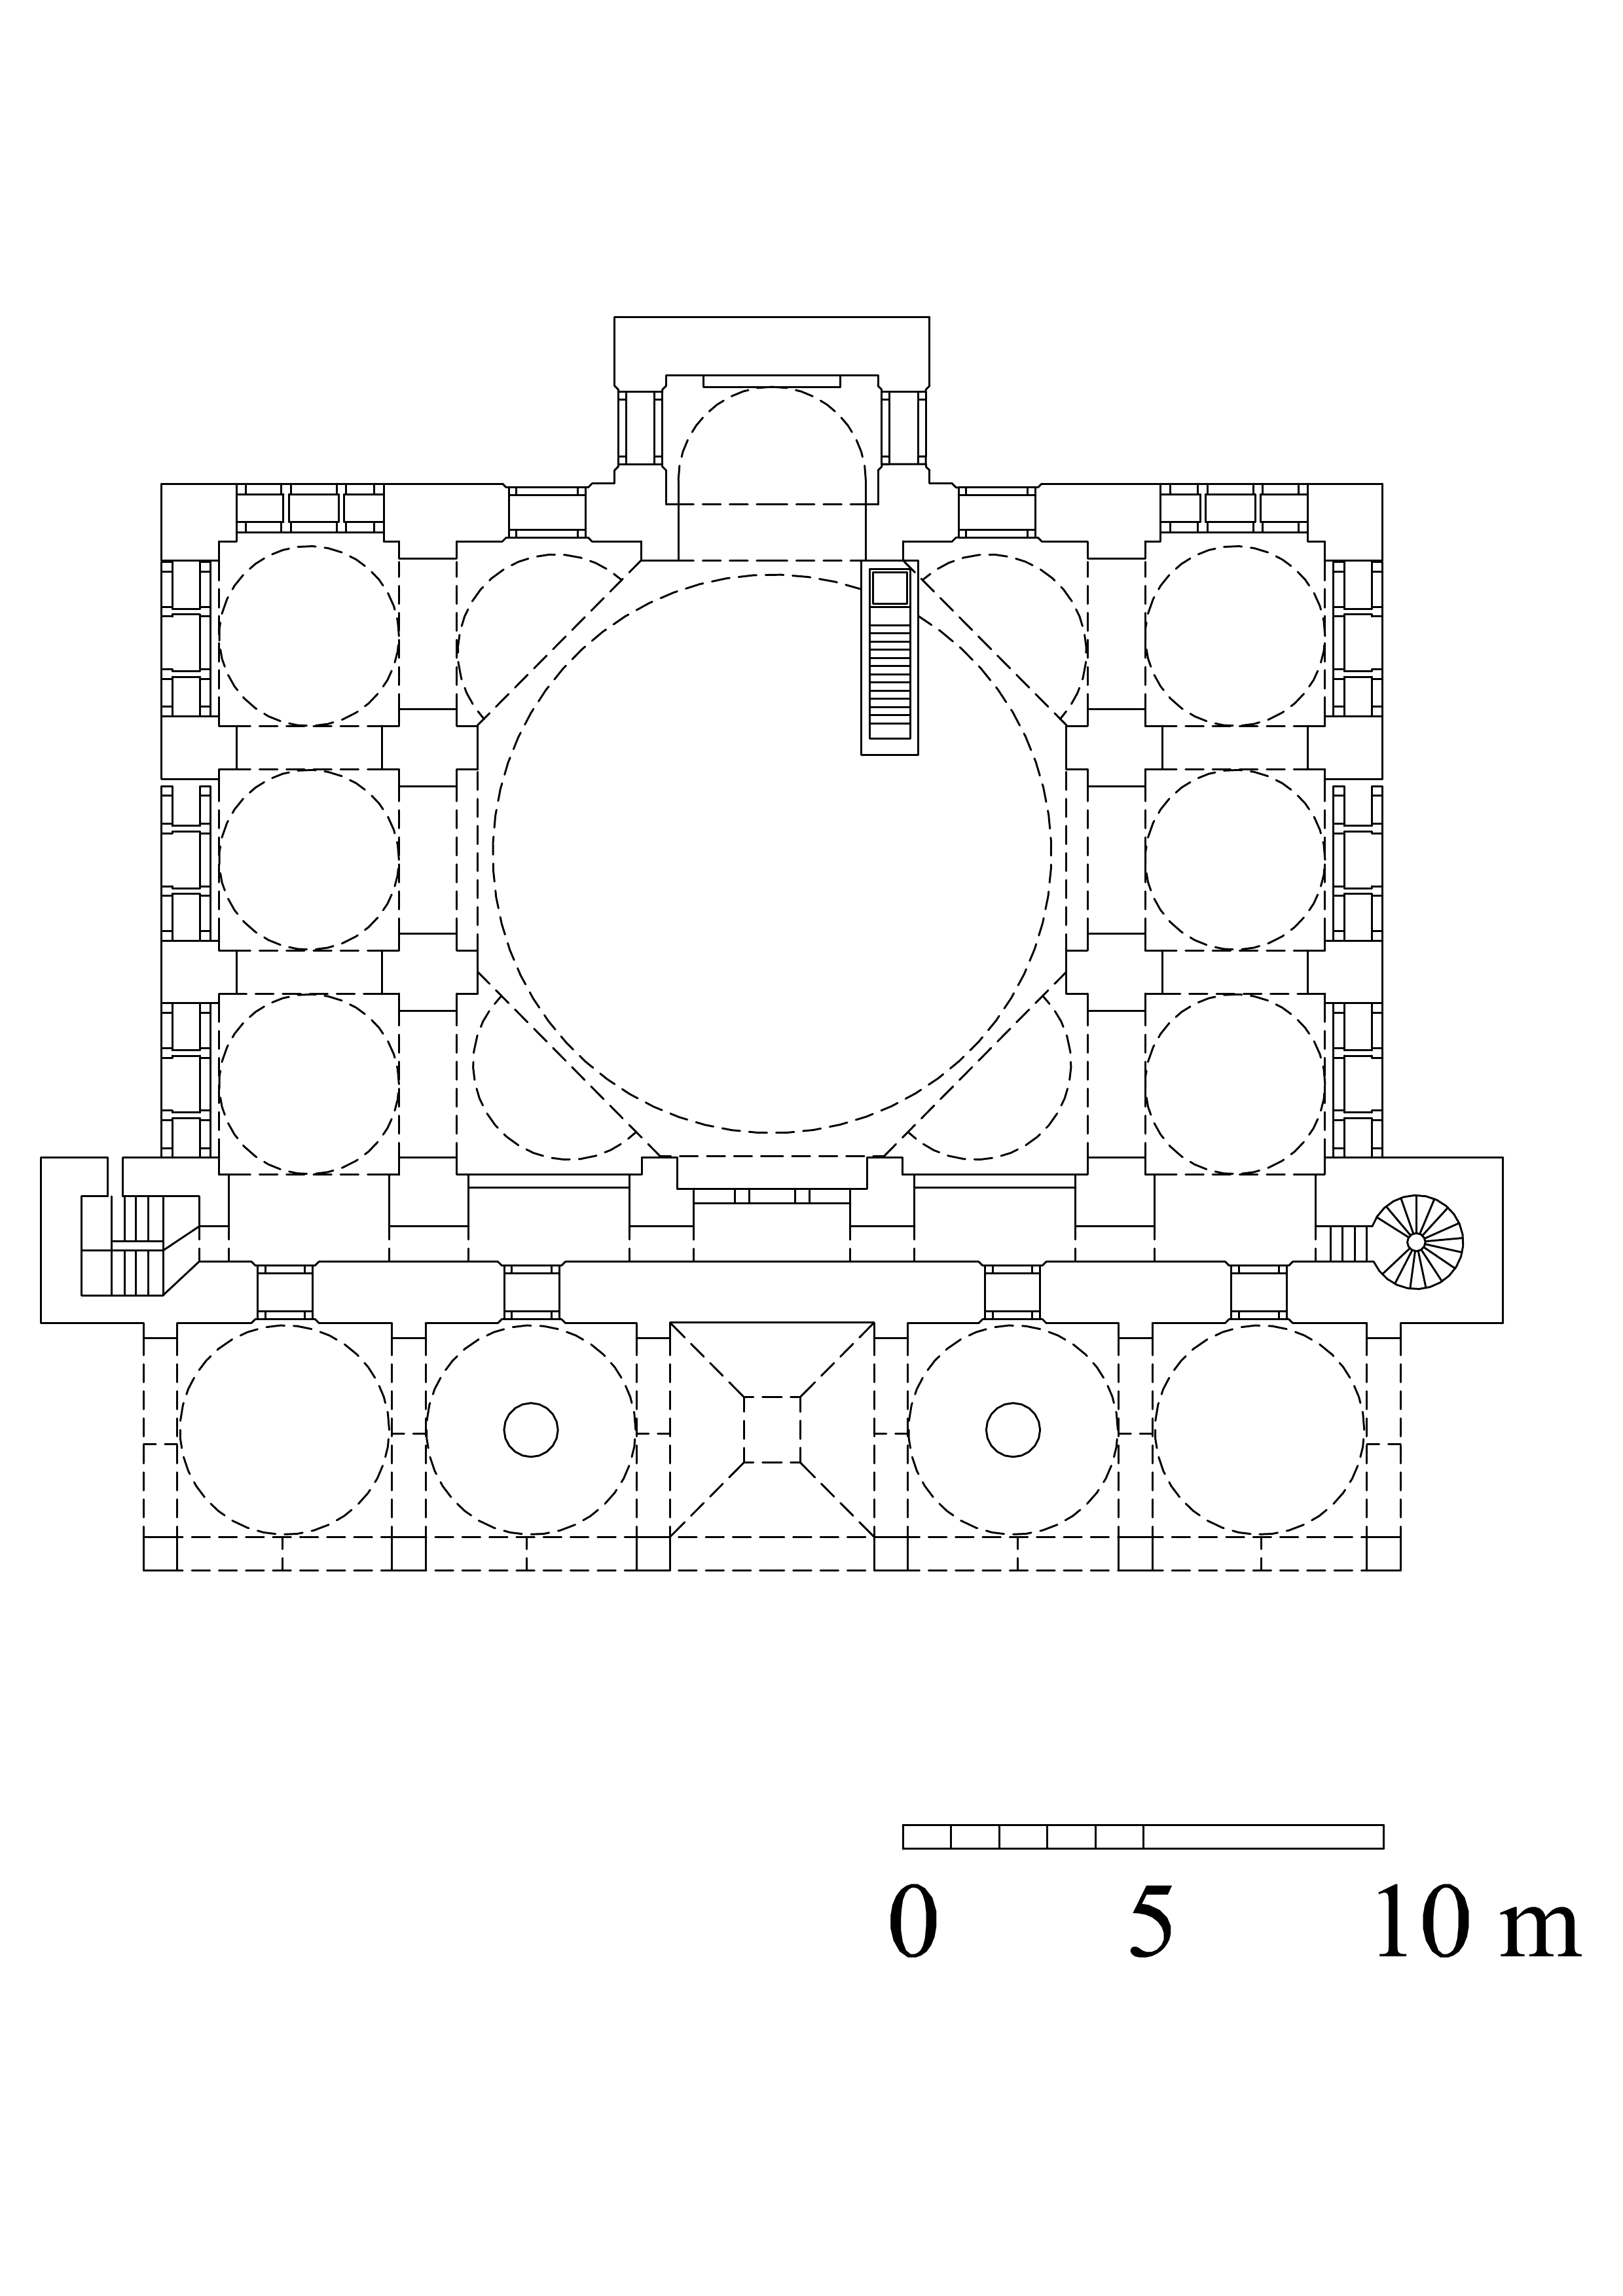 Mesih Mehmed Pasha Külliyesi - Floor plan of mosque, gallery level. DWG file in AutoCAD 2000 format. Click the download button to download a zipped file containing the .dwg file.